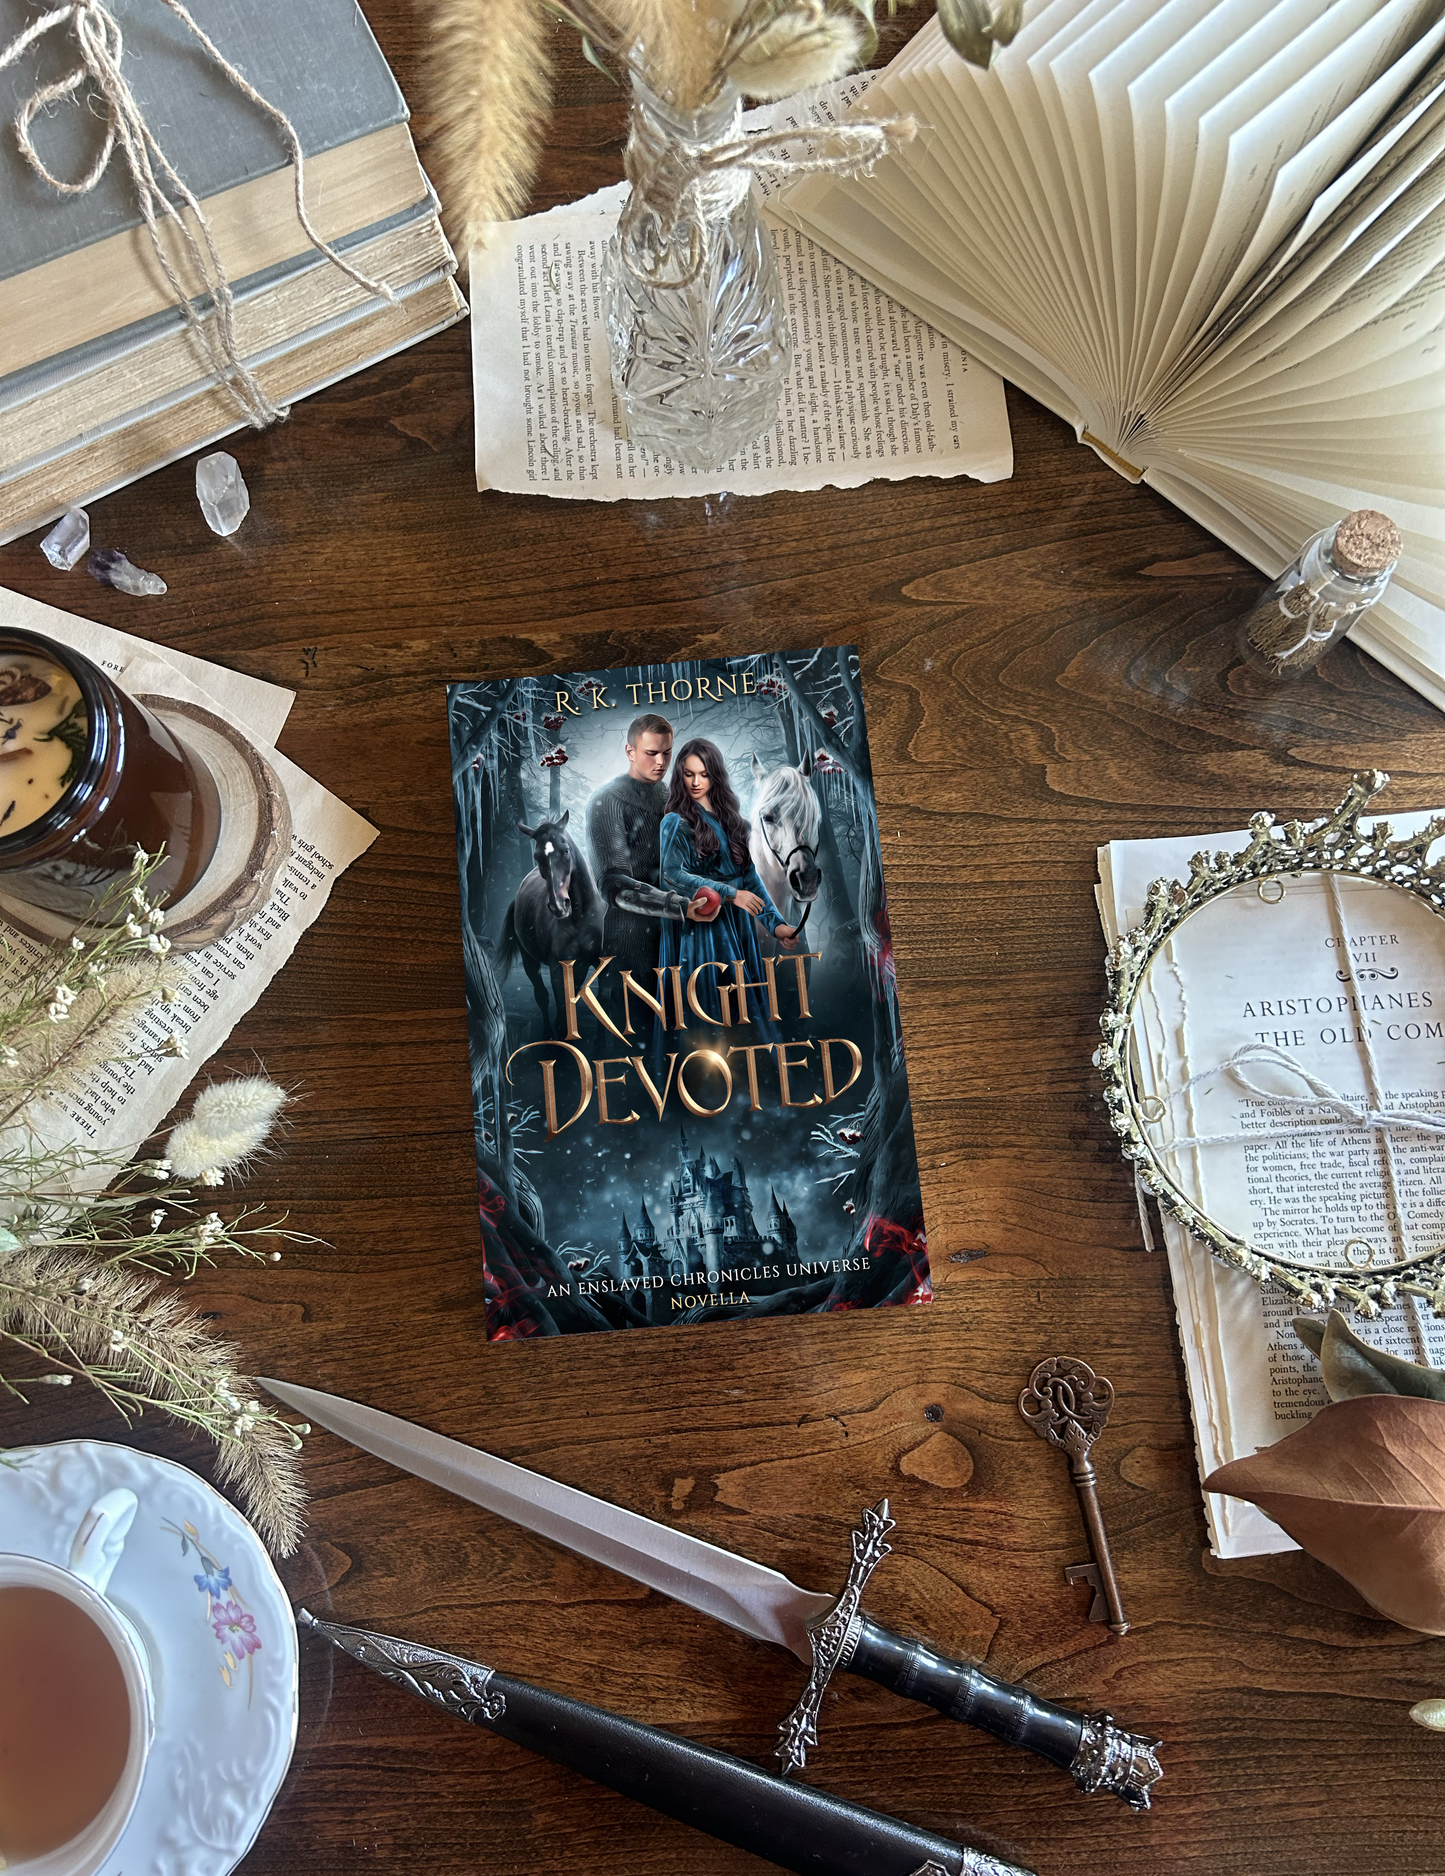 Knight Devoted Preorder | An Enslaved Chronicles Universe Novella